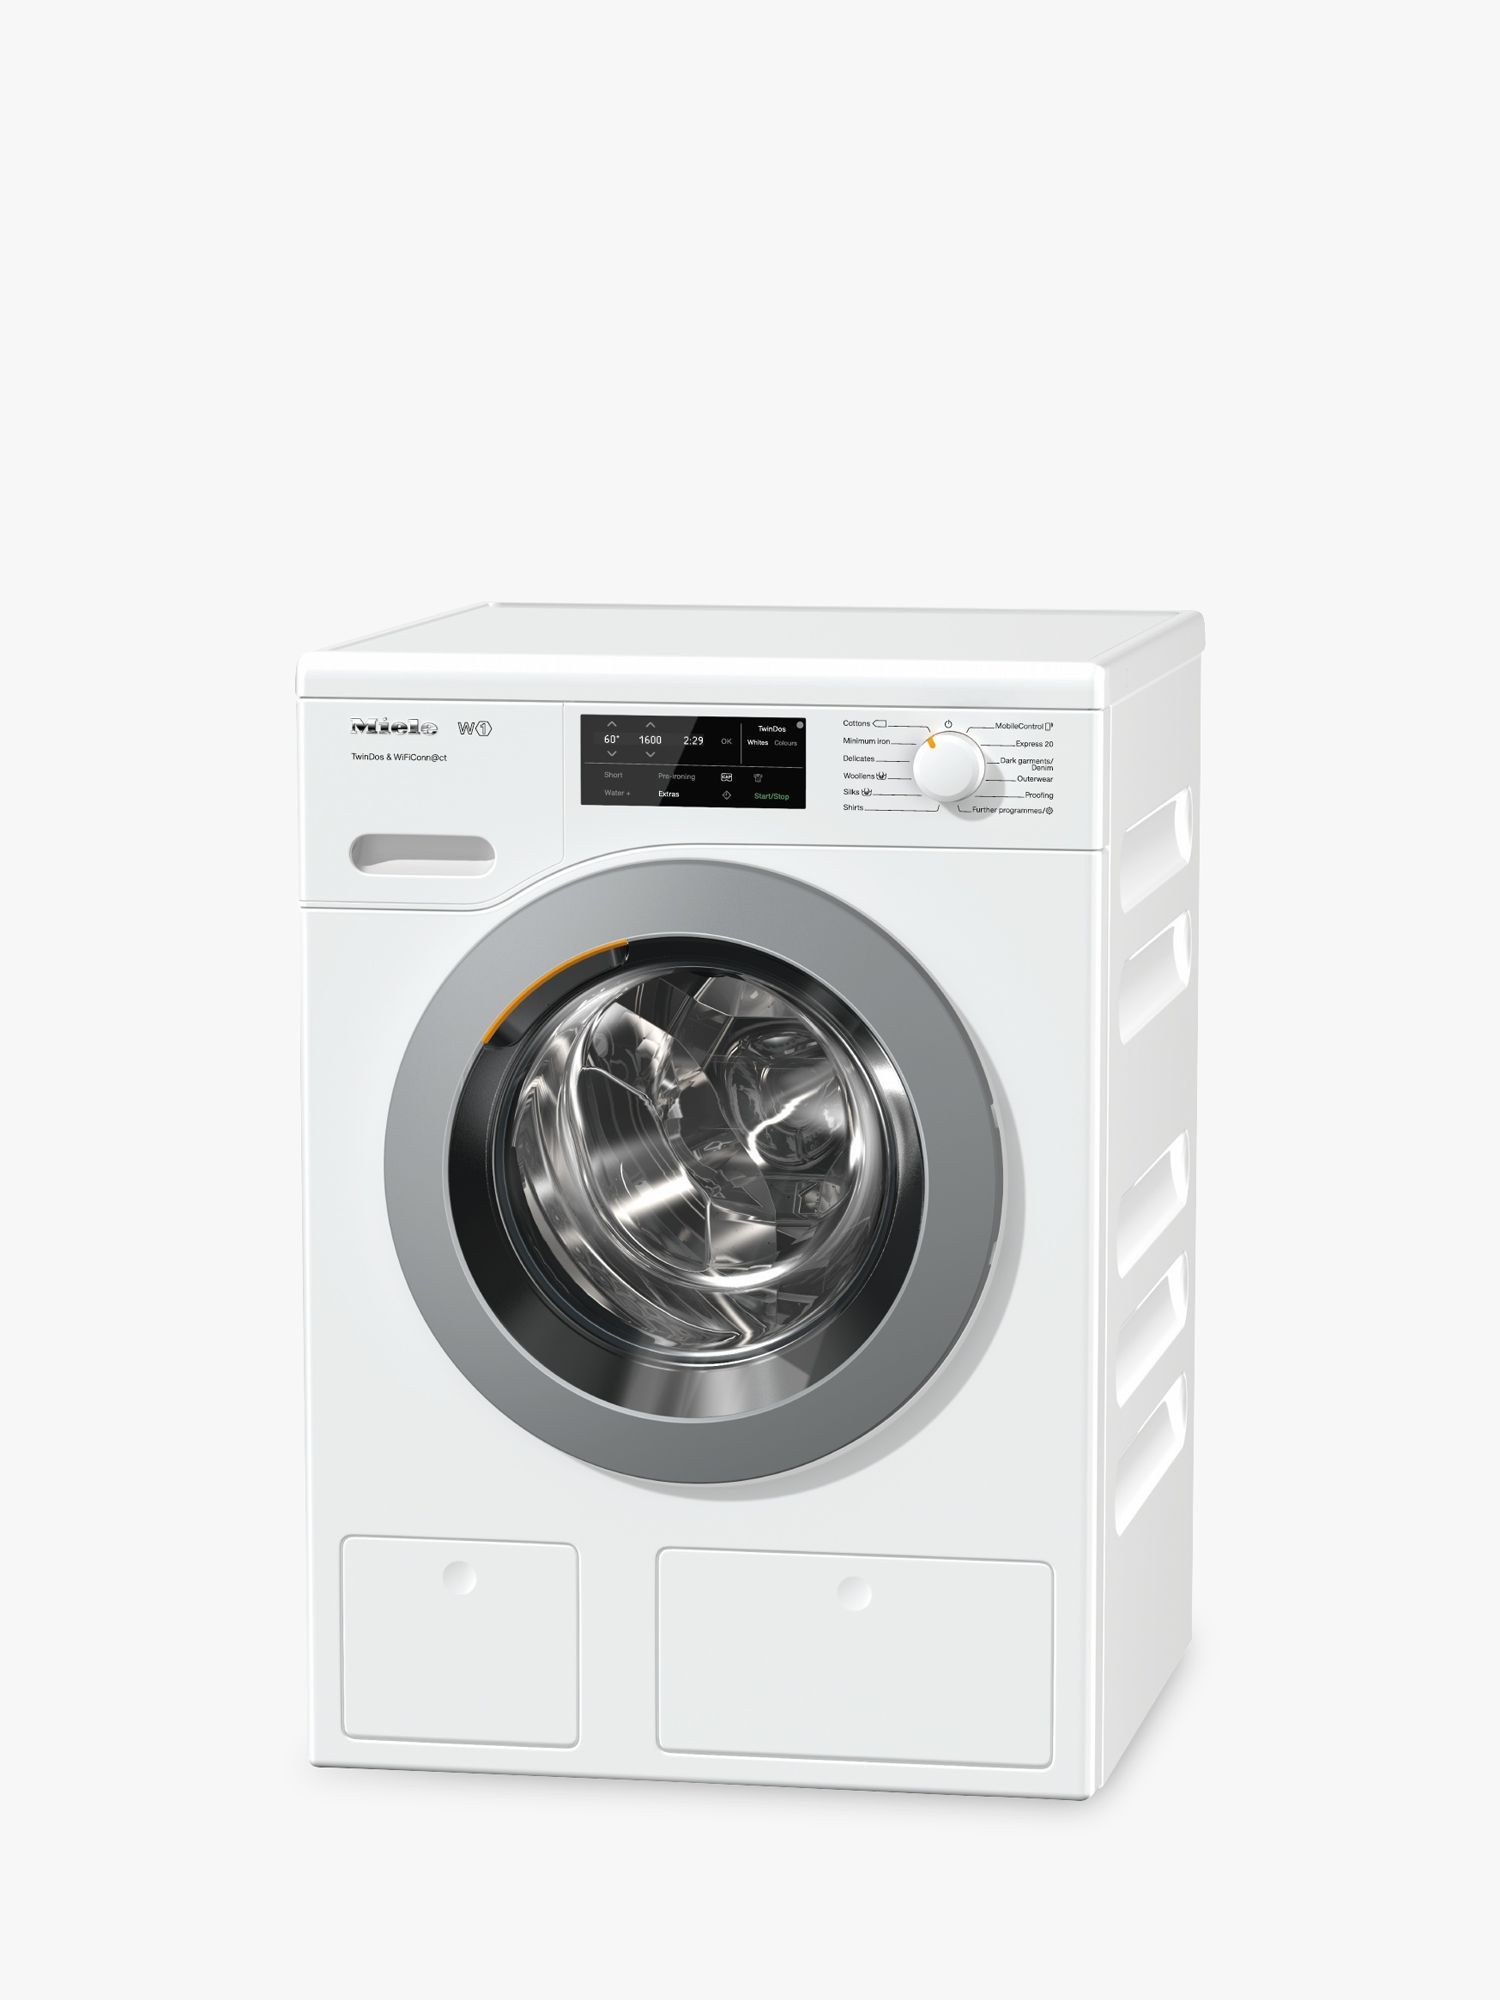 Miele WCE660 TwinDos Freestanding Washing Machine, 8kg Load, A+++ Energy Rating, 1400rpm Spin, White